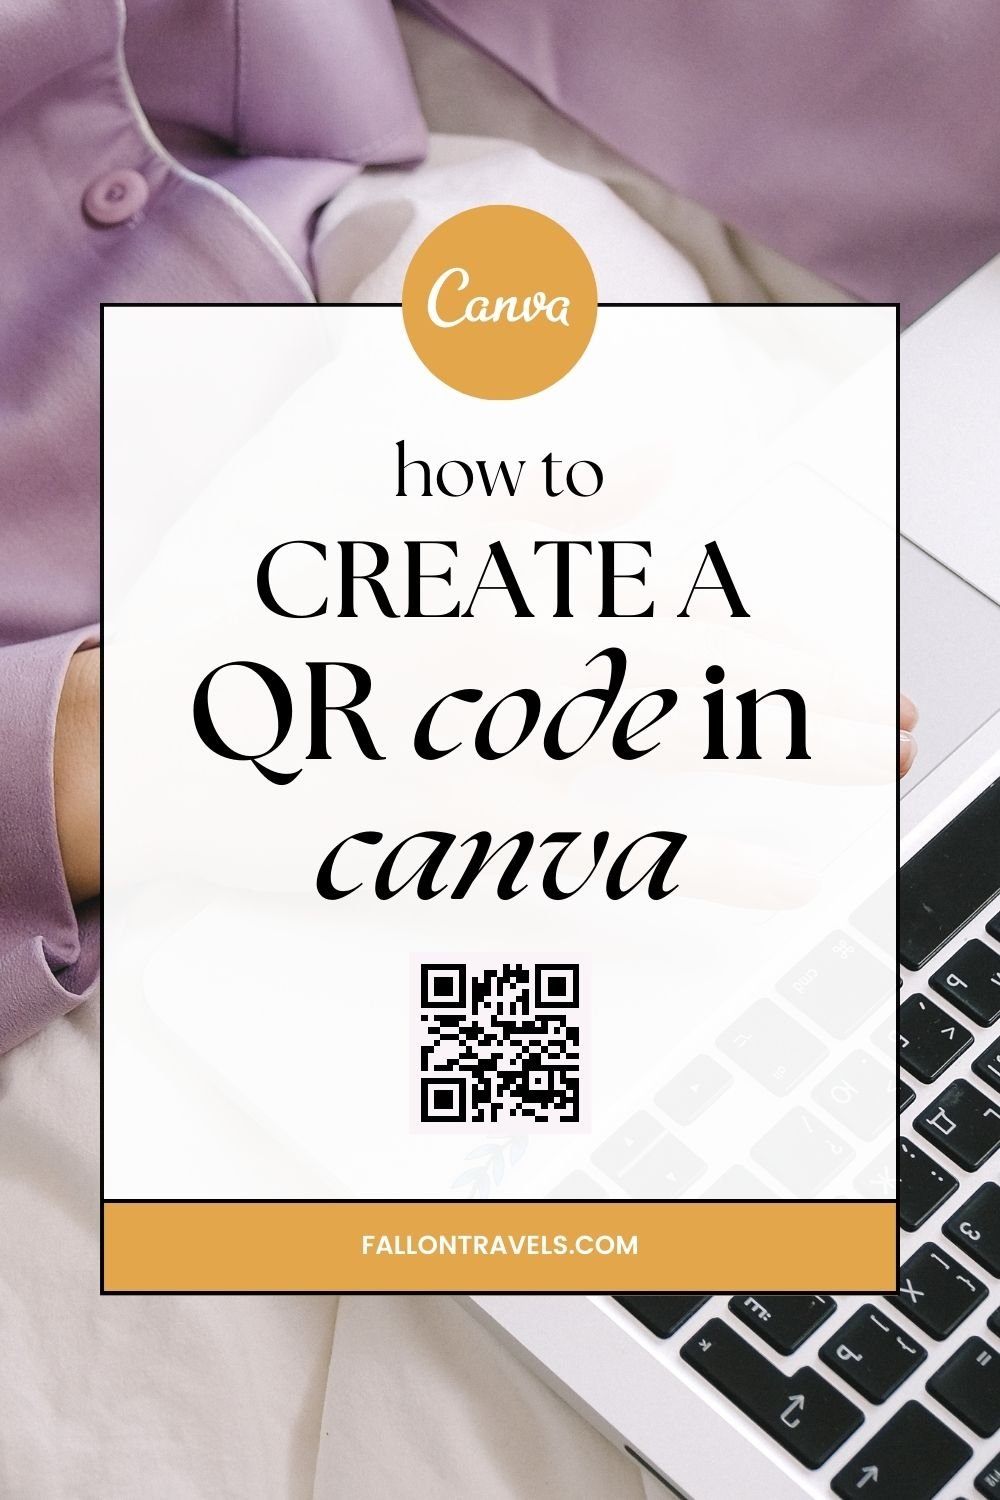 How to Create a QR Code in Canva | Fallon Travels